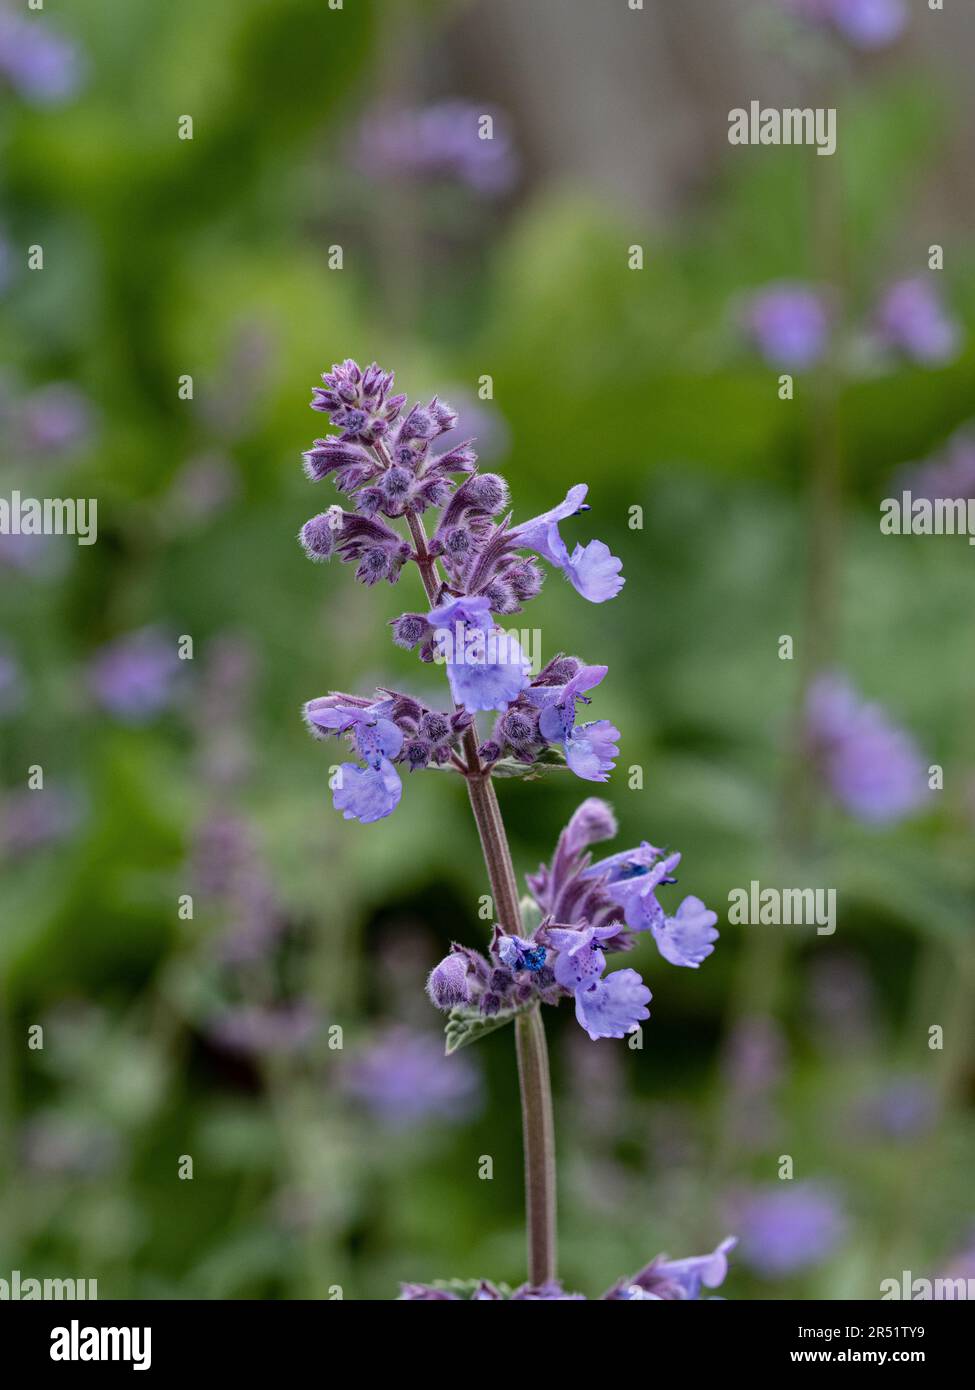 A close up of a single pale blue flower spike of the catmint Nepeta faassenii Stock Photo